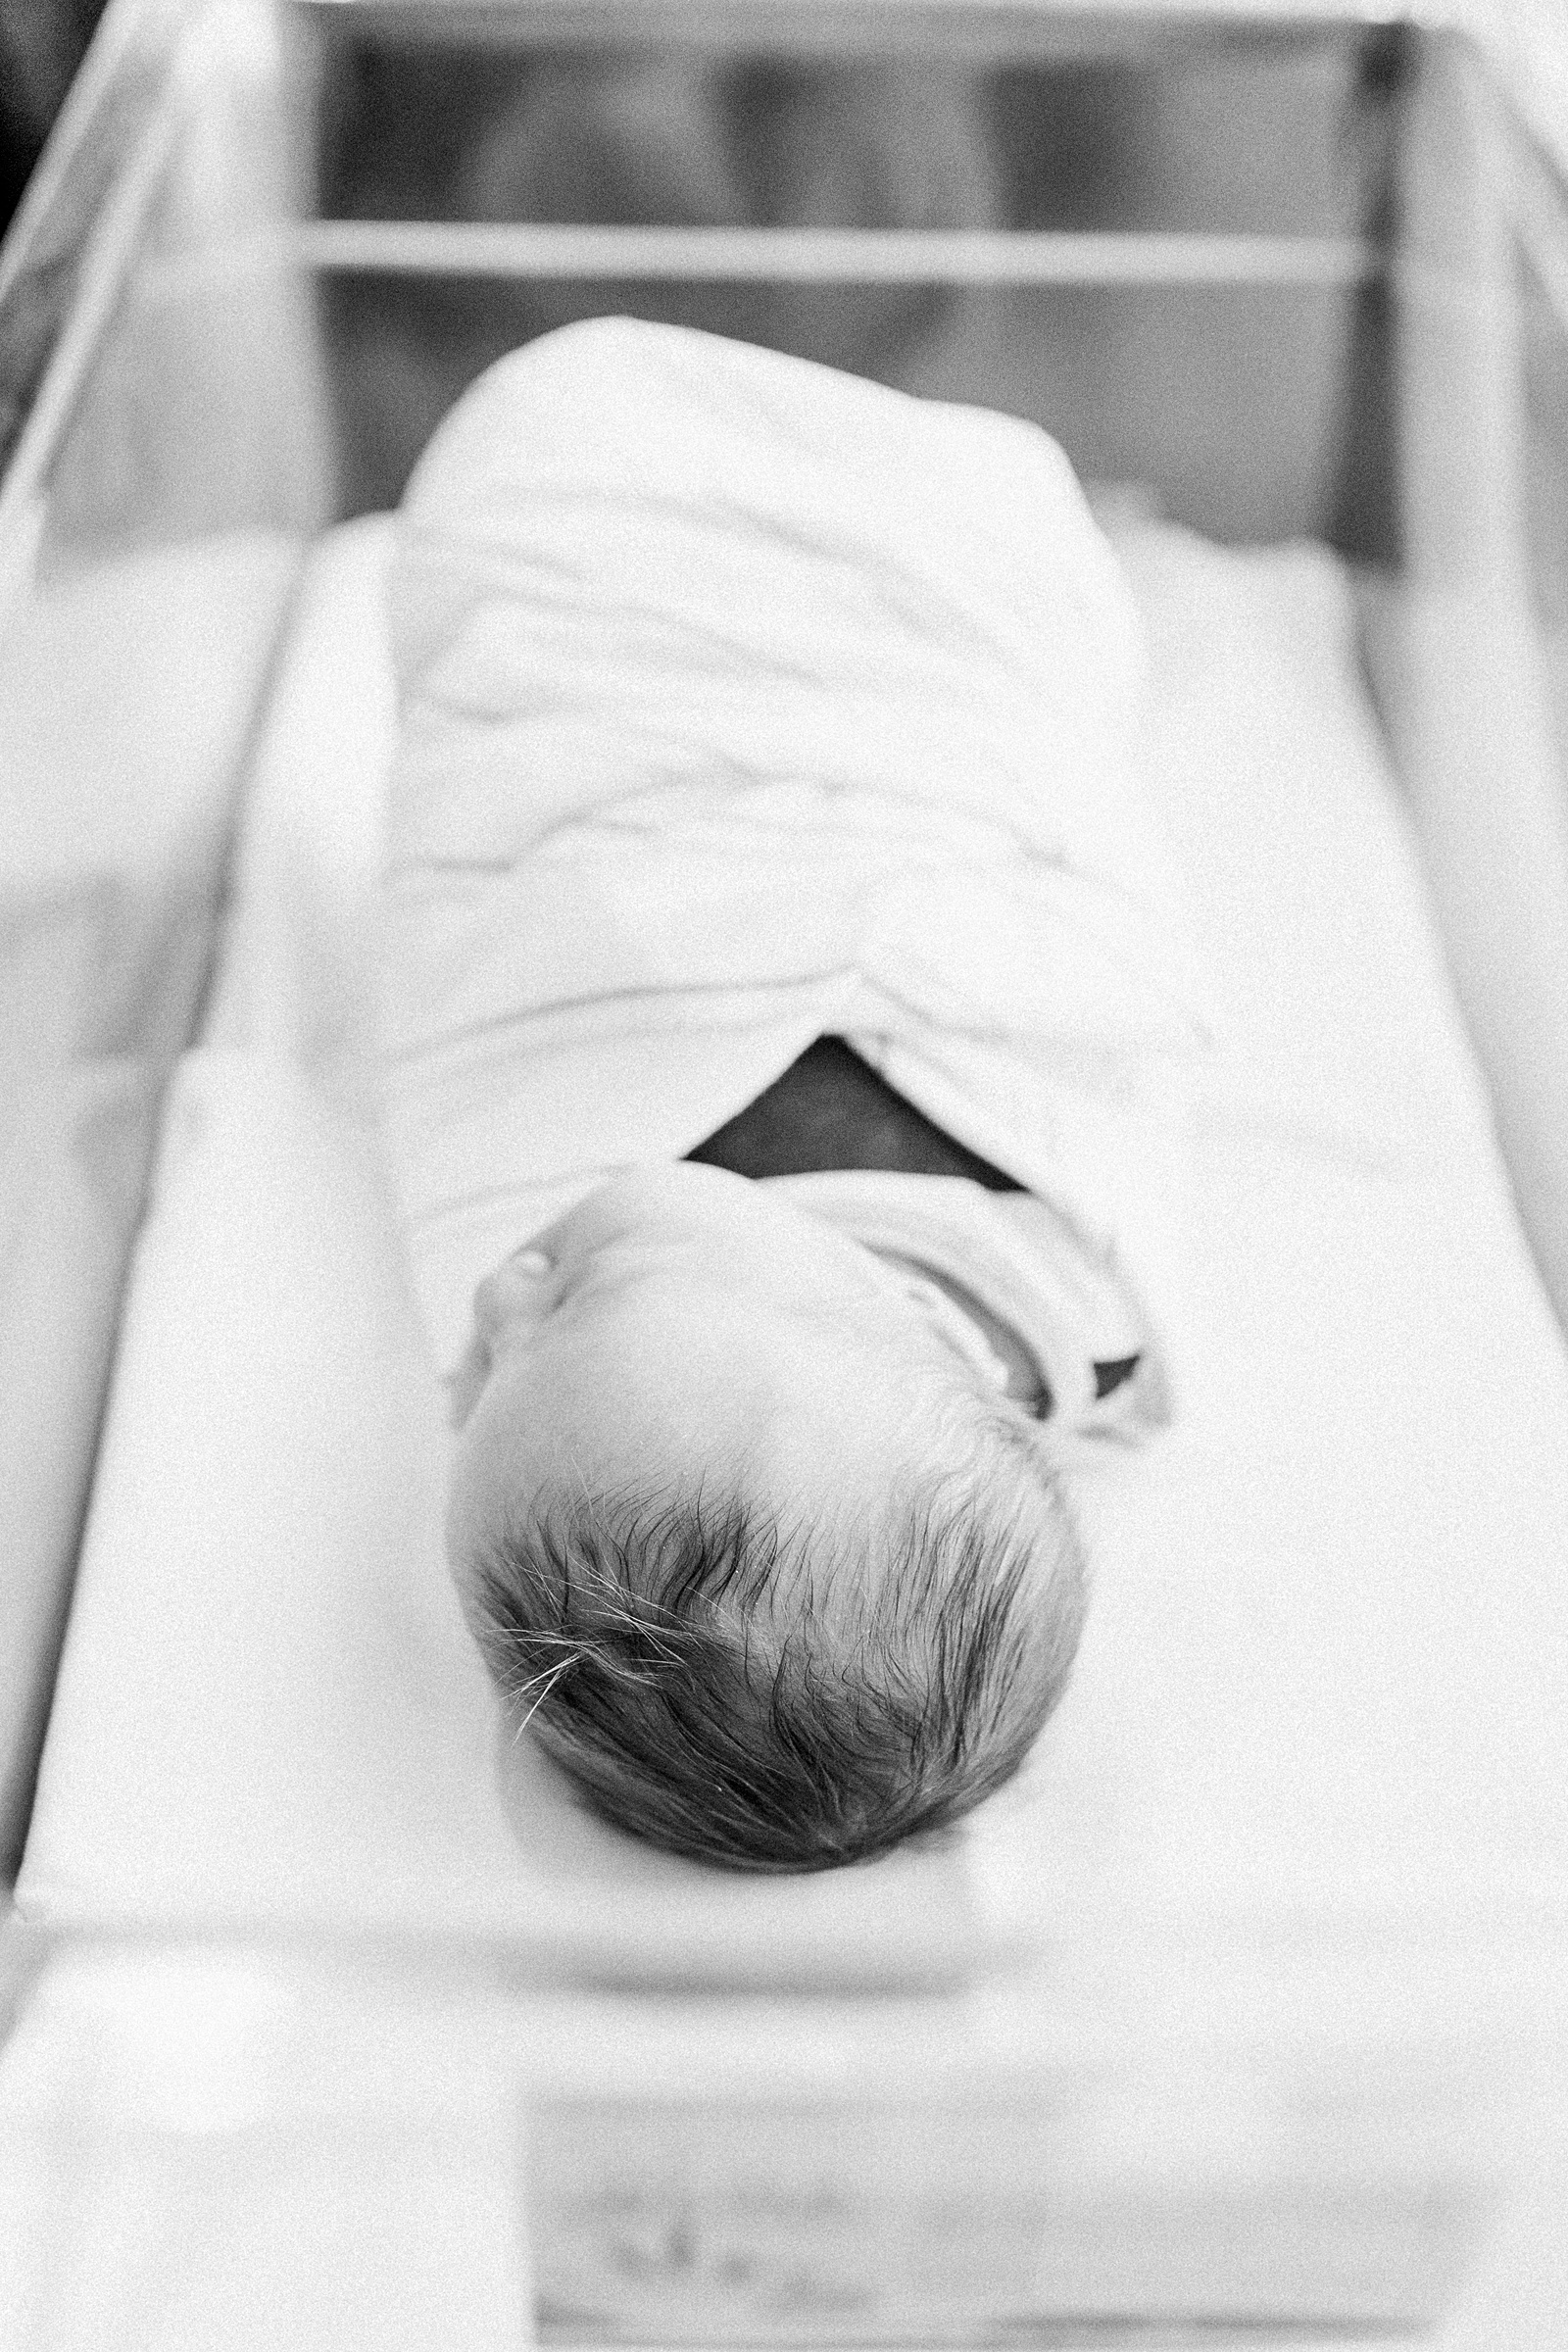 Black and white image of newborn in hospital bassinet | Caitlyn Motycka Photography